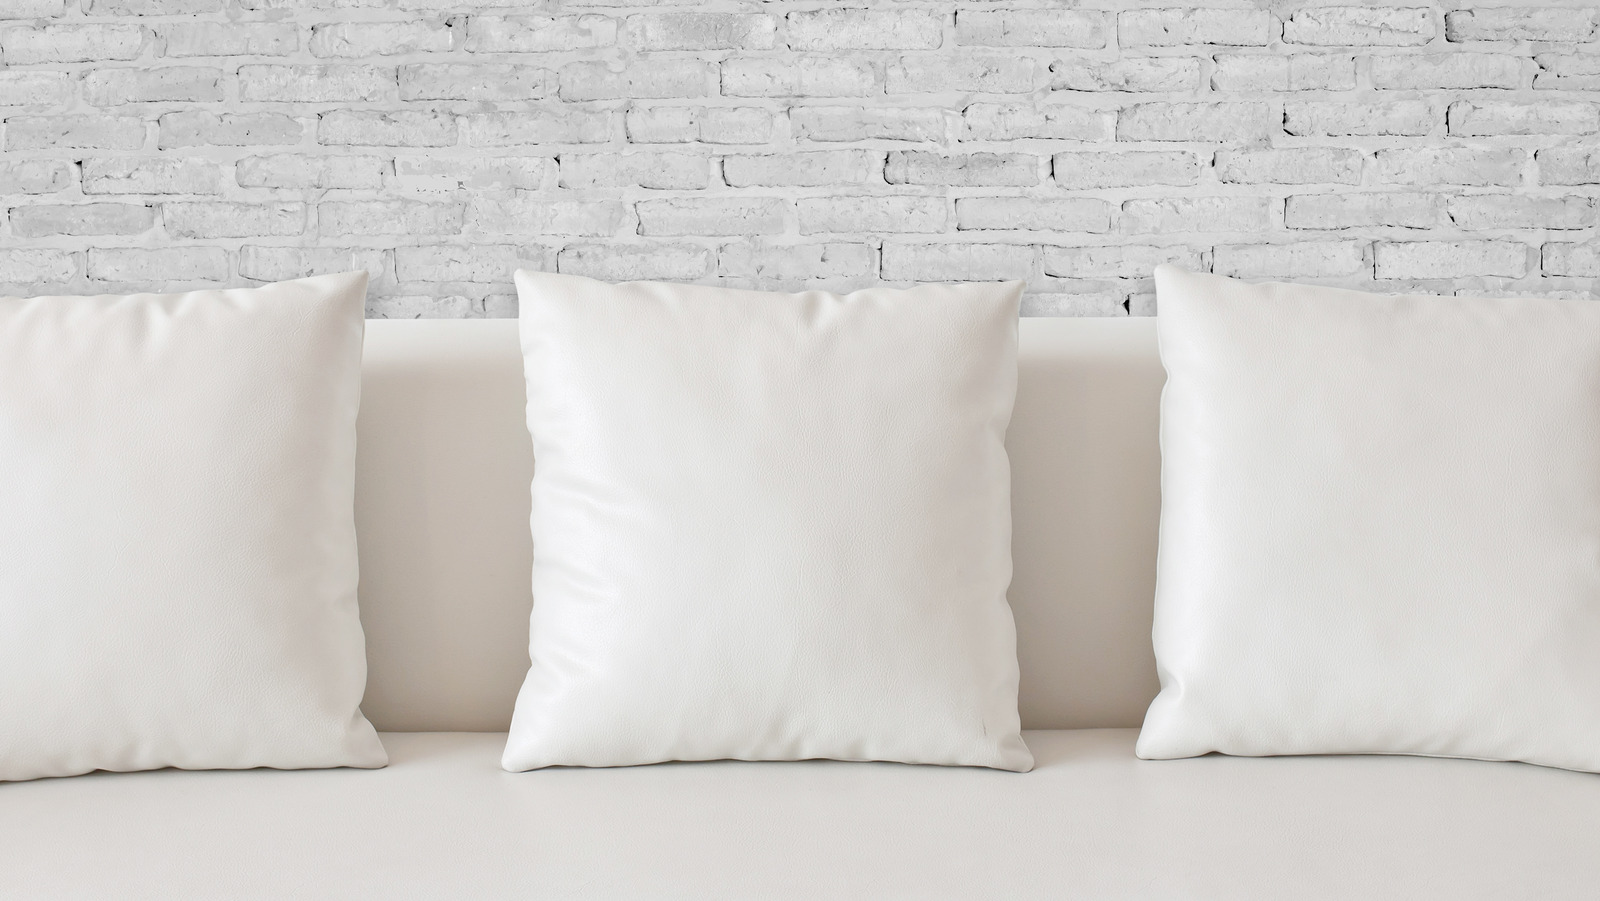 https://www.housedigest.com/img/gallery/why-you-should-reconsider-styling-your-living-room-with-white-pillows/l-intro-1685916429.jpg